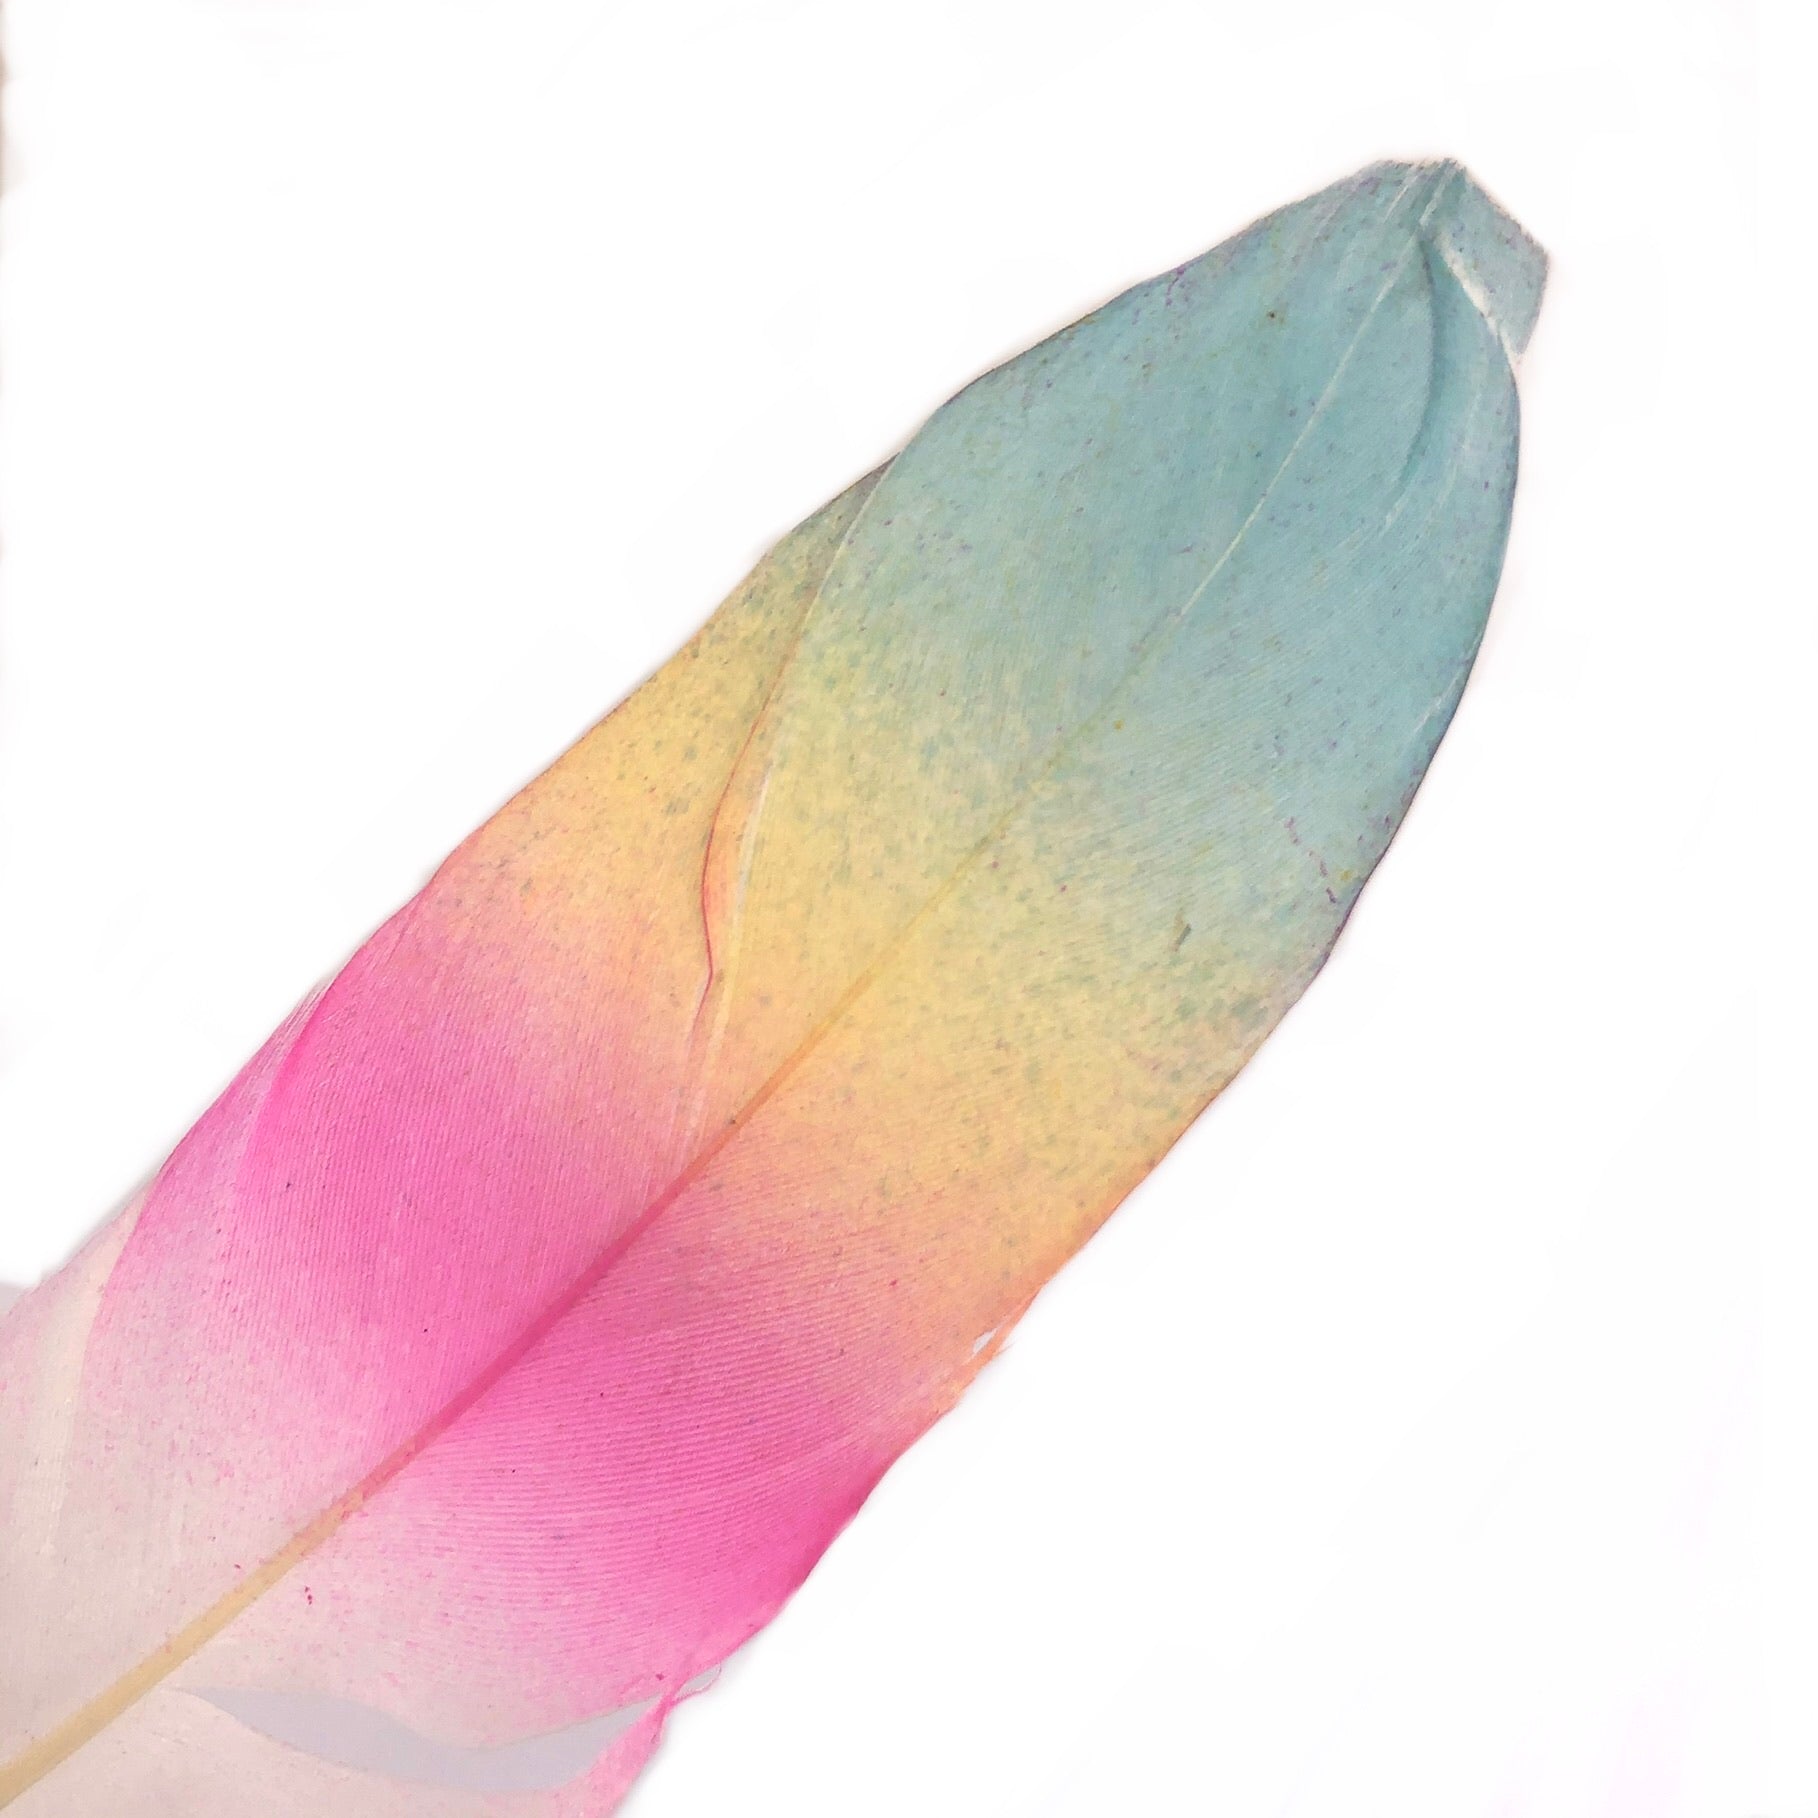 Goose Pointer Printed White Feather Art Craft - Ombre Rainbow Style 18 x 10 pcs